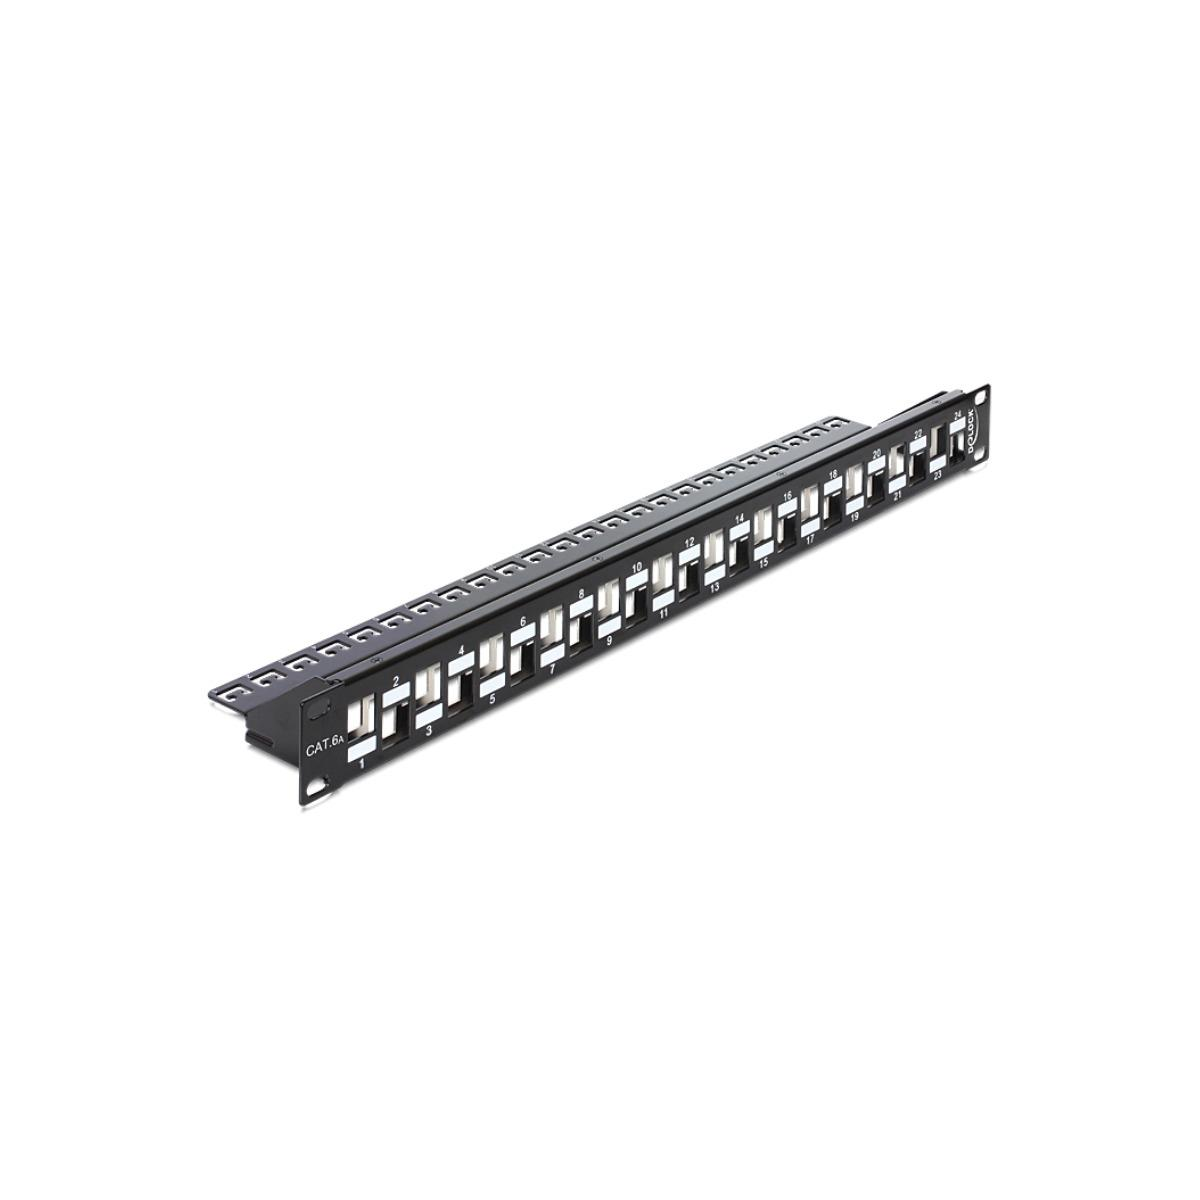 DELOCK 43278 Patchpanel